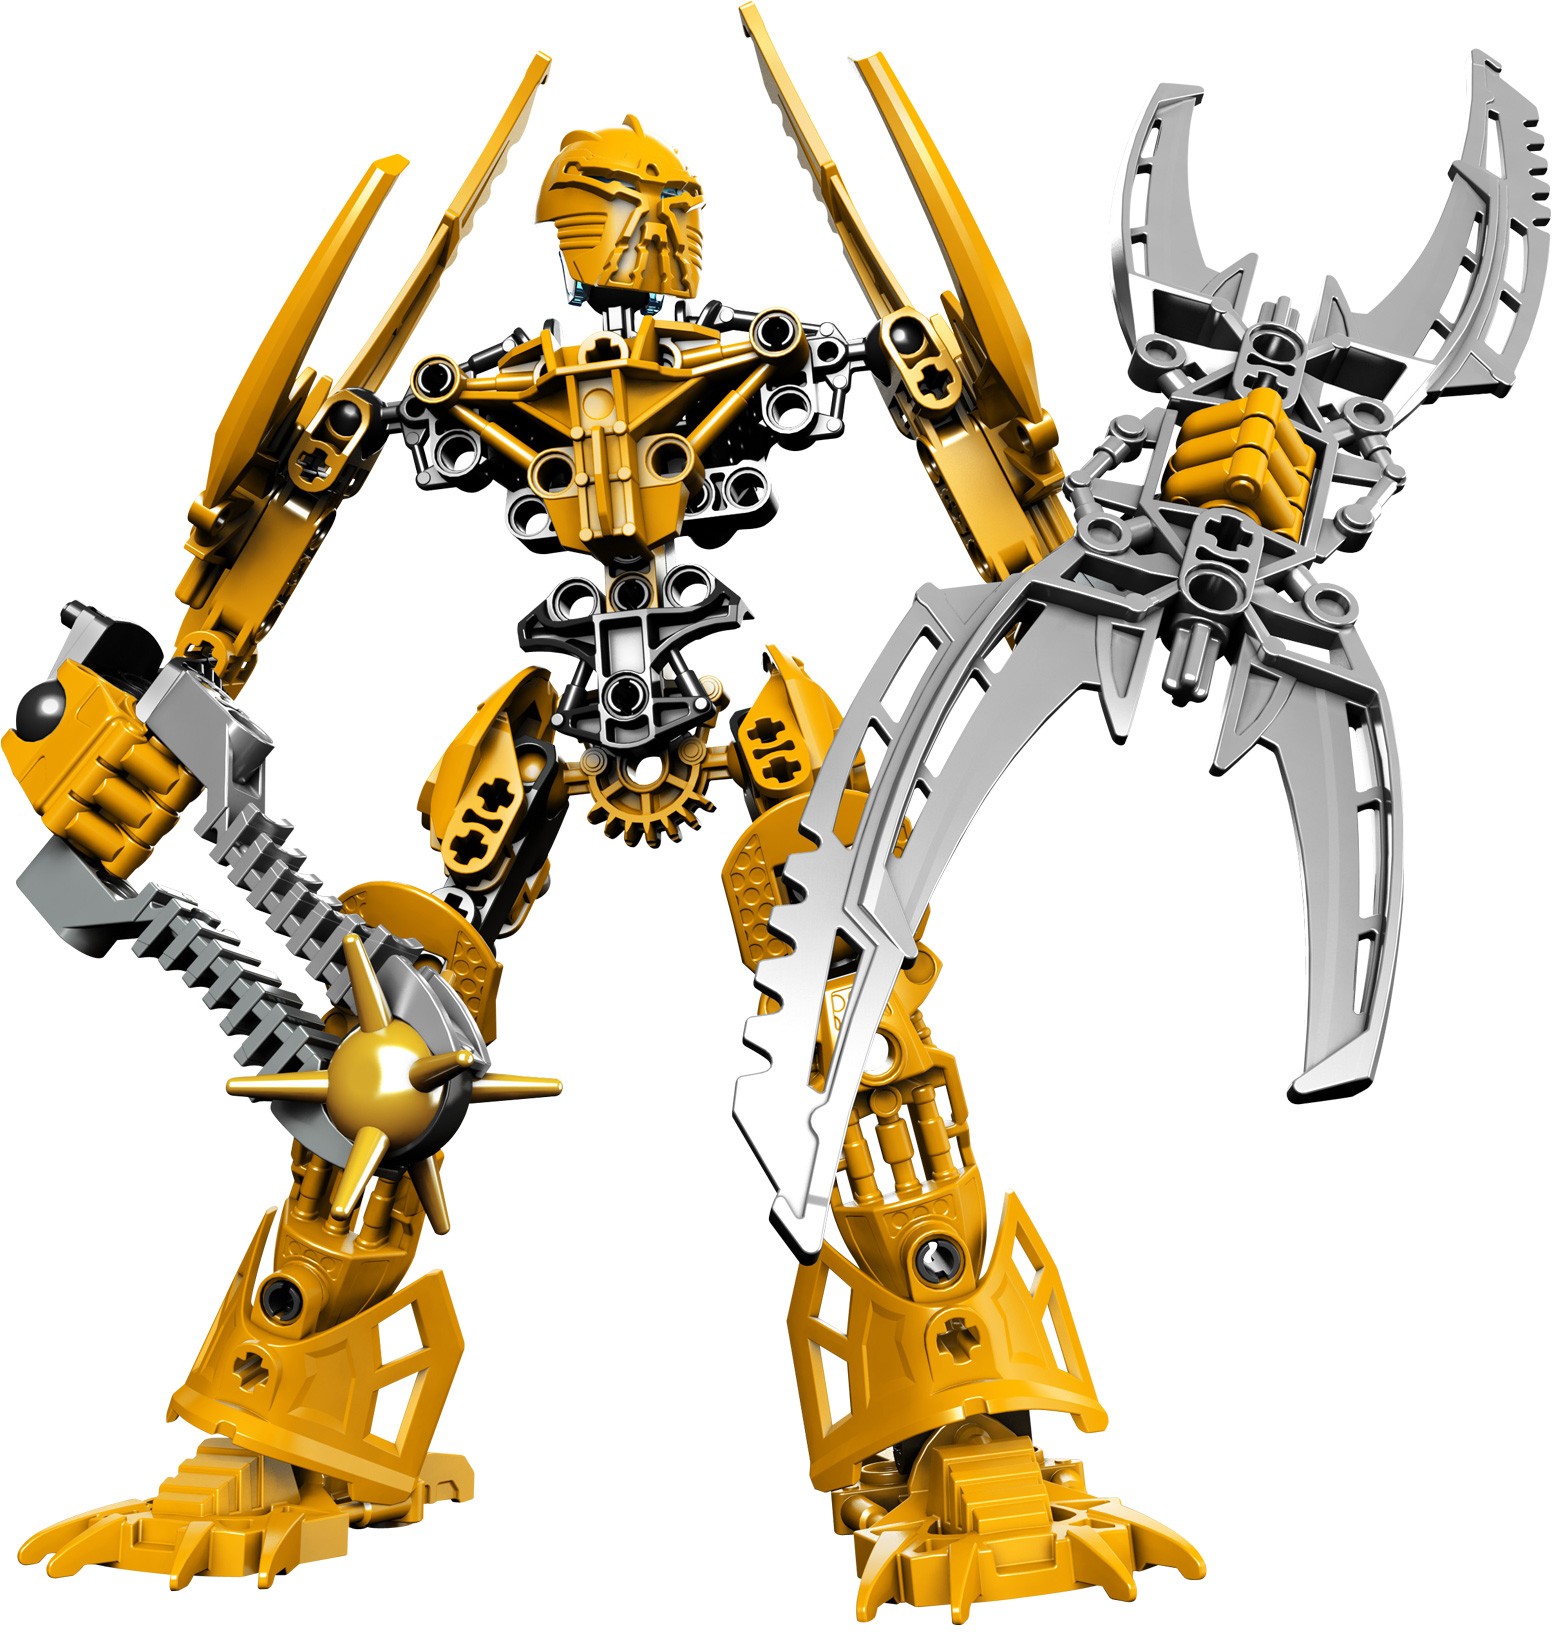 Bionicle Legends available from TRU in the USA and Canada | Brickset: LEGO set guide and database